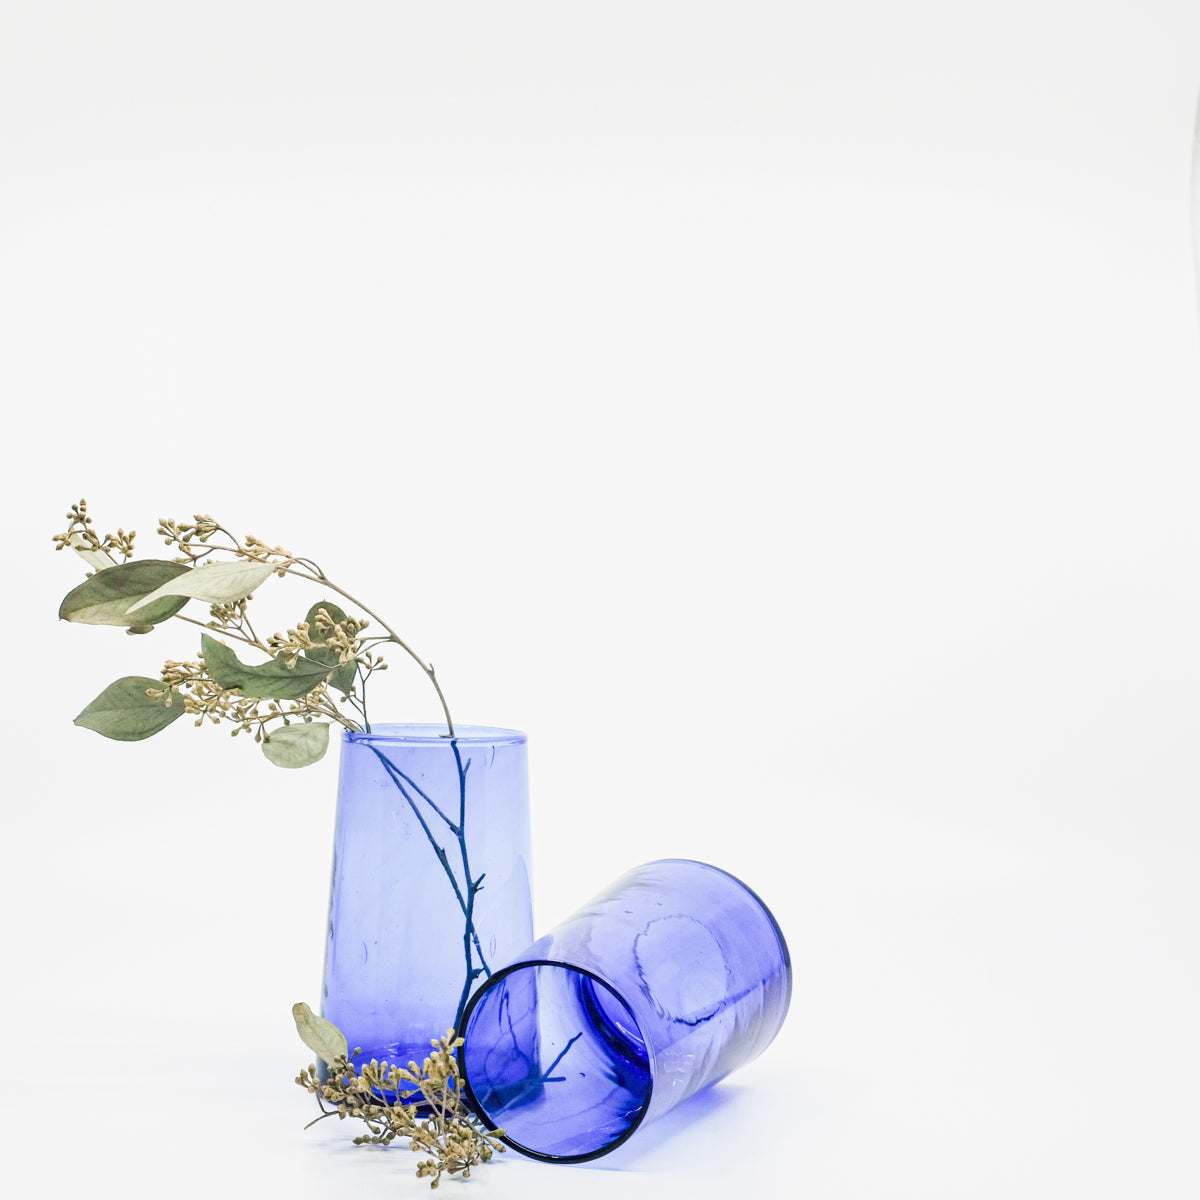 translucent blue glasses with greenery